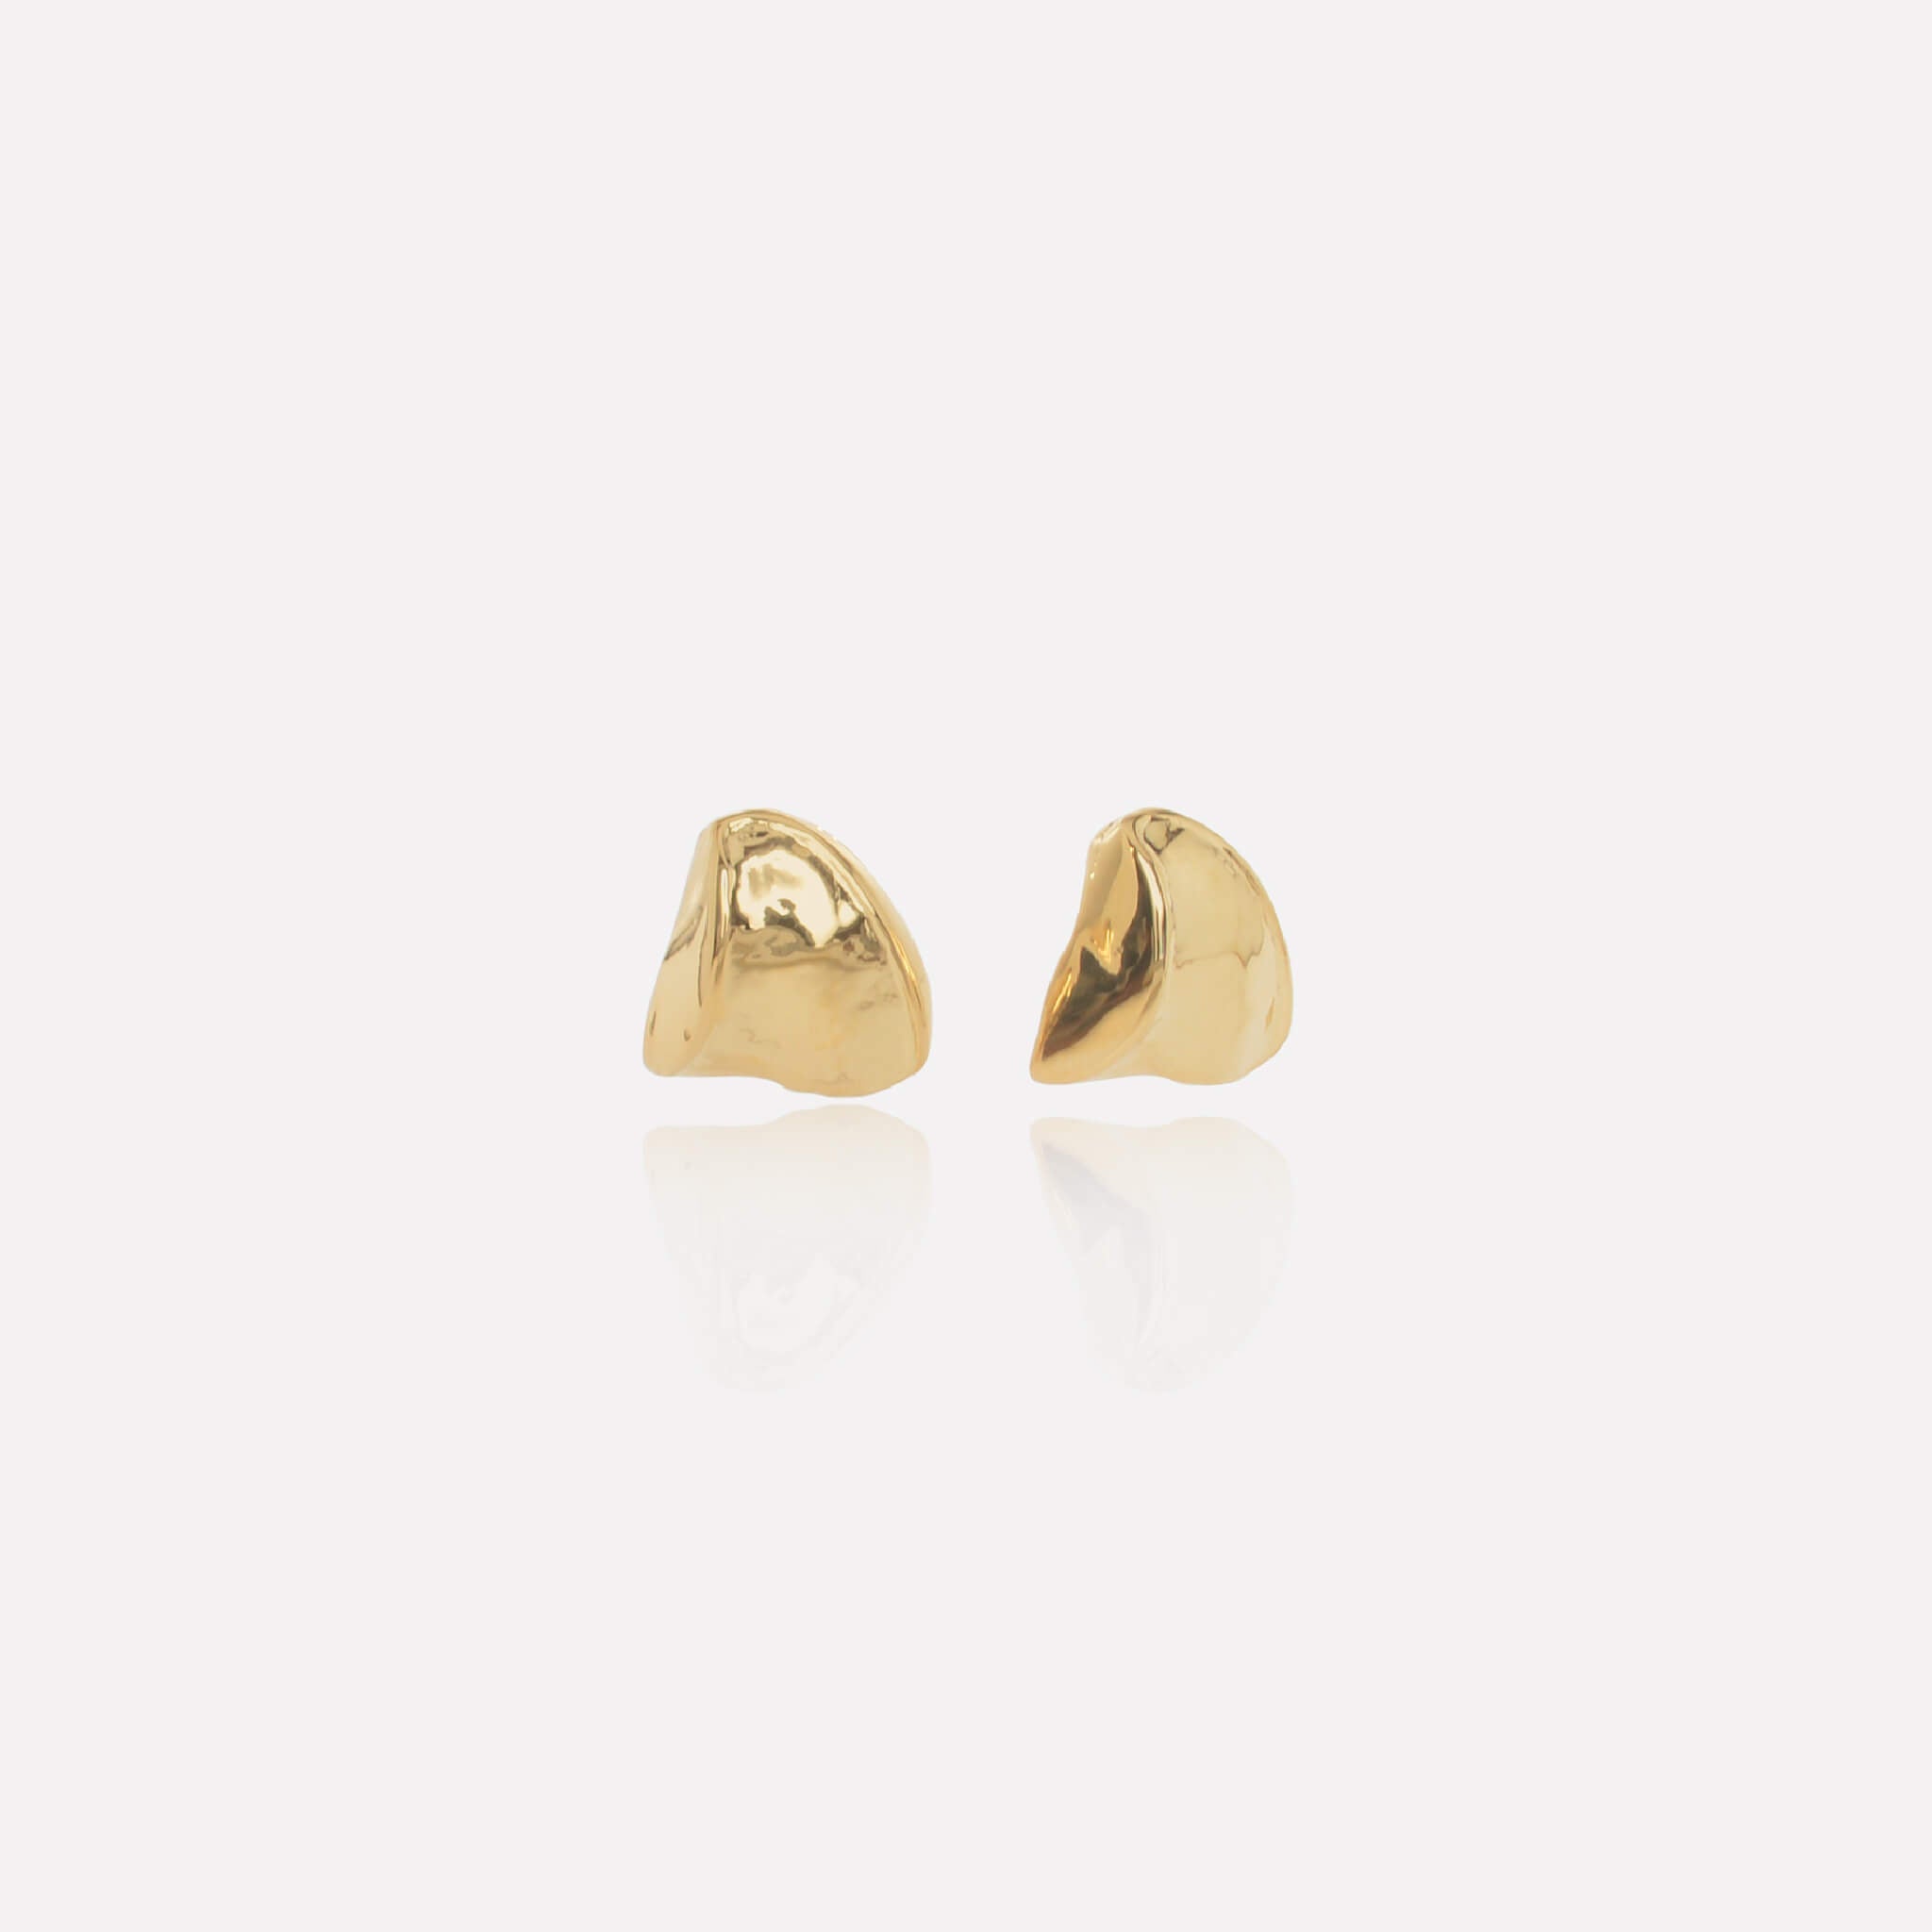 Fragment Earring in 14k Gold Plated